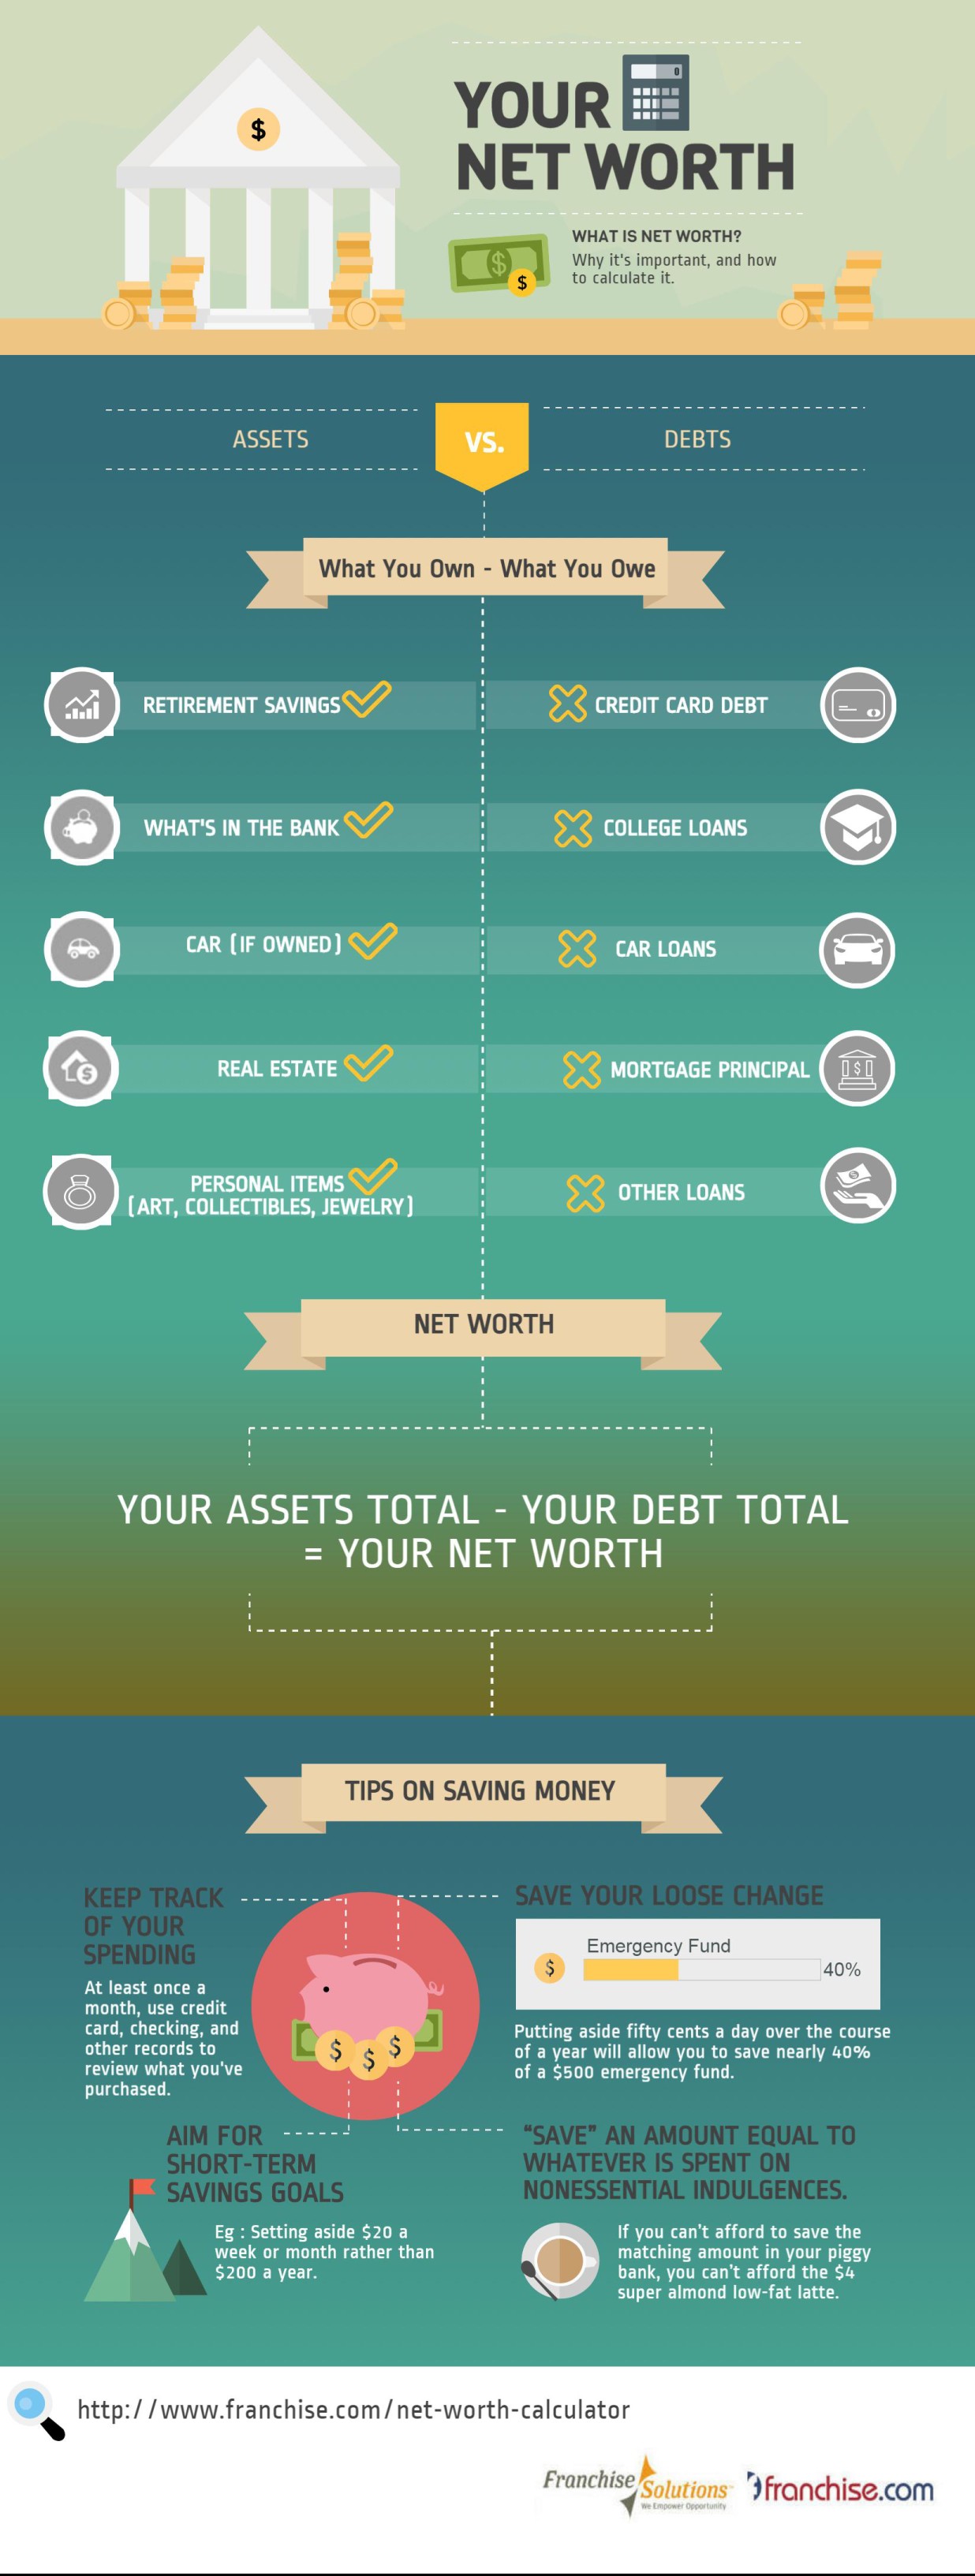 10 Items You Need to Calulate Your Net Worth